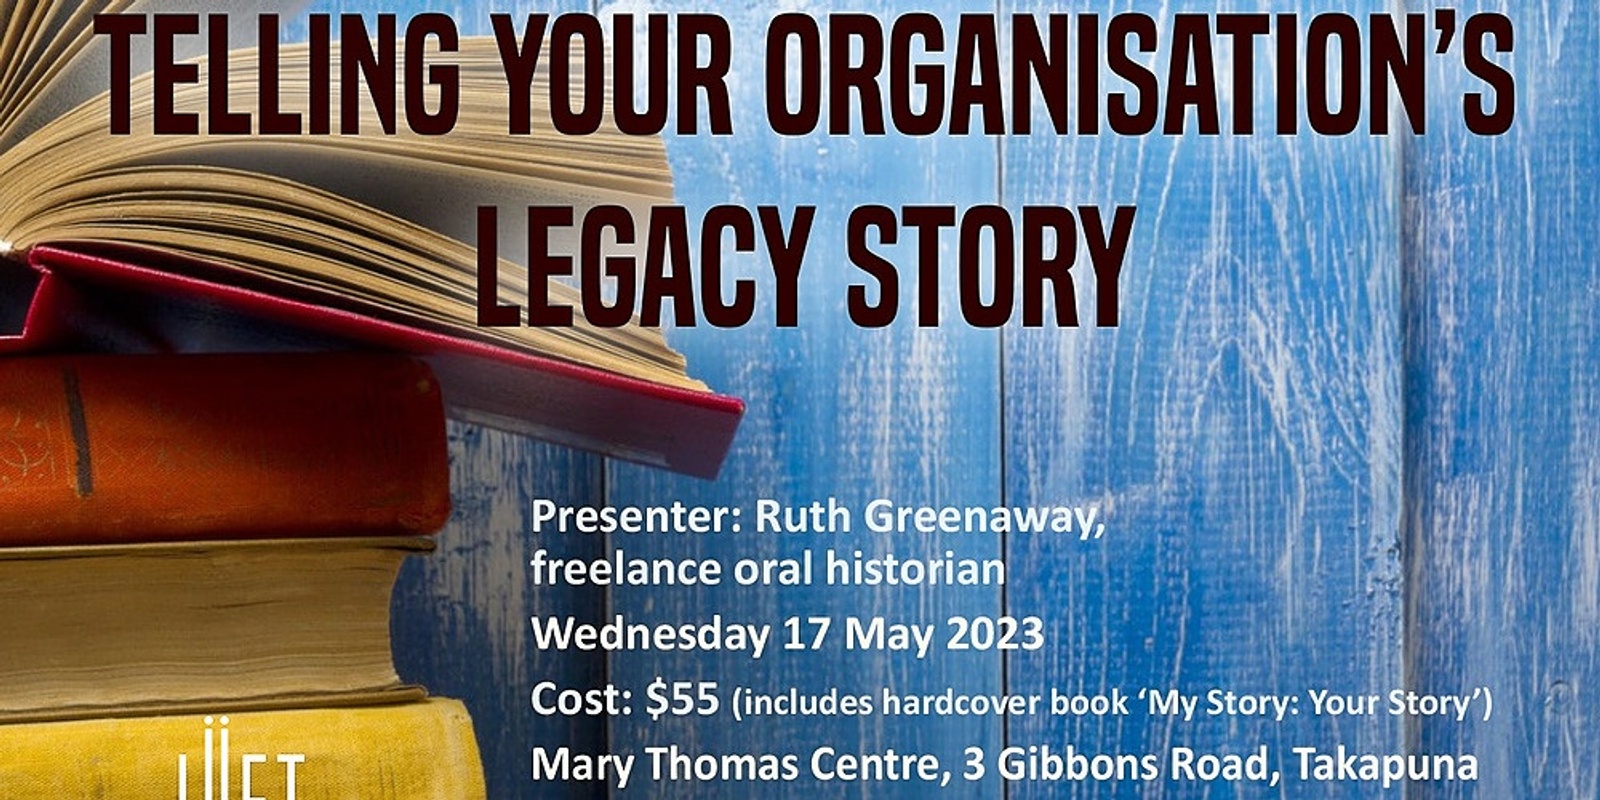 Banner image for Telling Your Organisation's Legacy Story